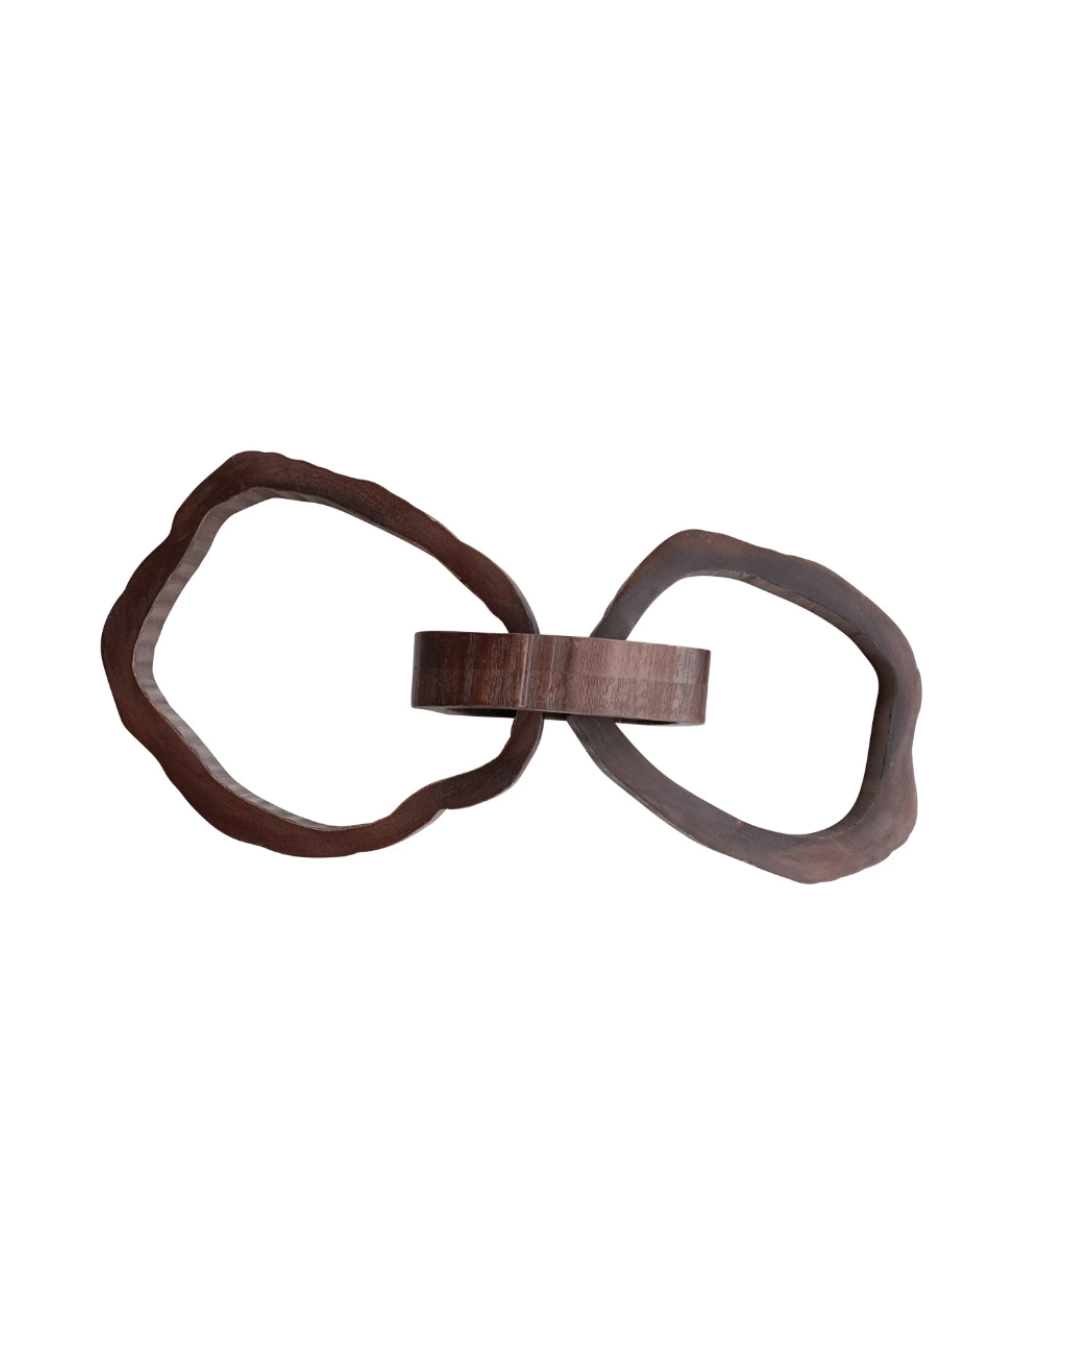 A Creative Co-op Wood Chain with two interlocked loops, isolated on a white background. The wood has a dark brown finish with visible grain, reminiscent of a Scottsdale Arizona bungalow.